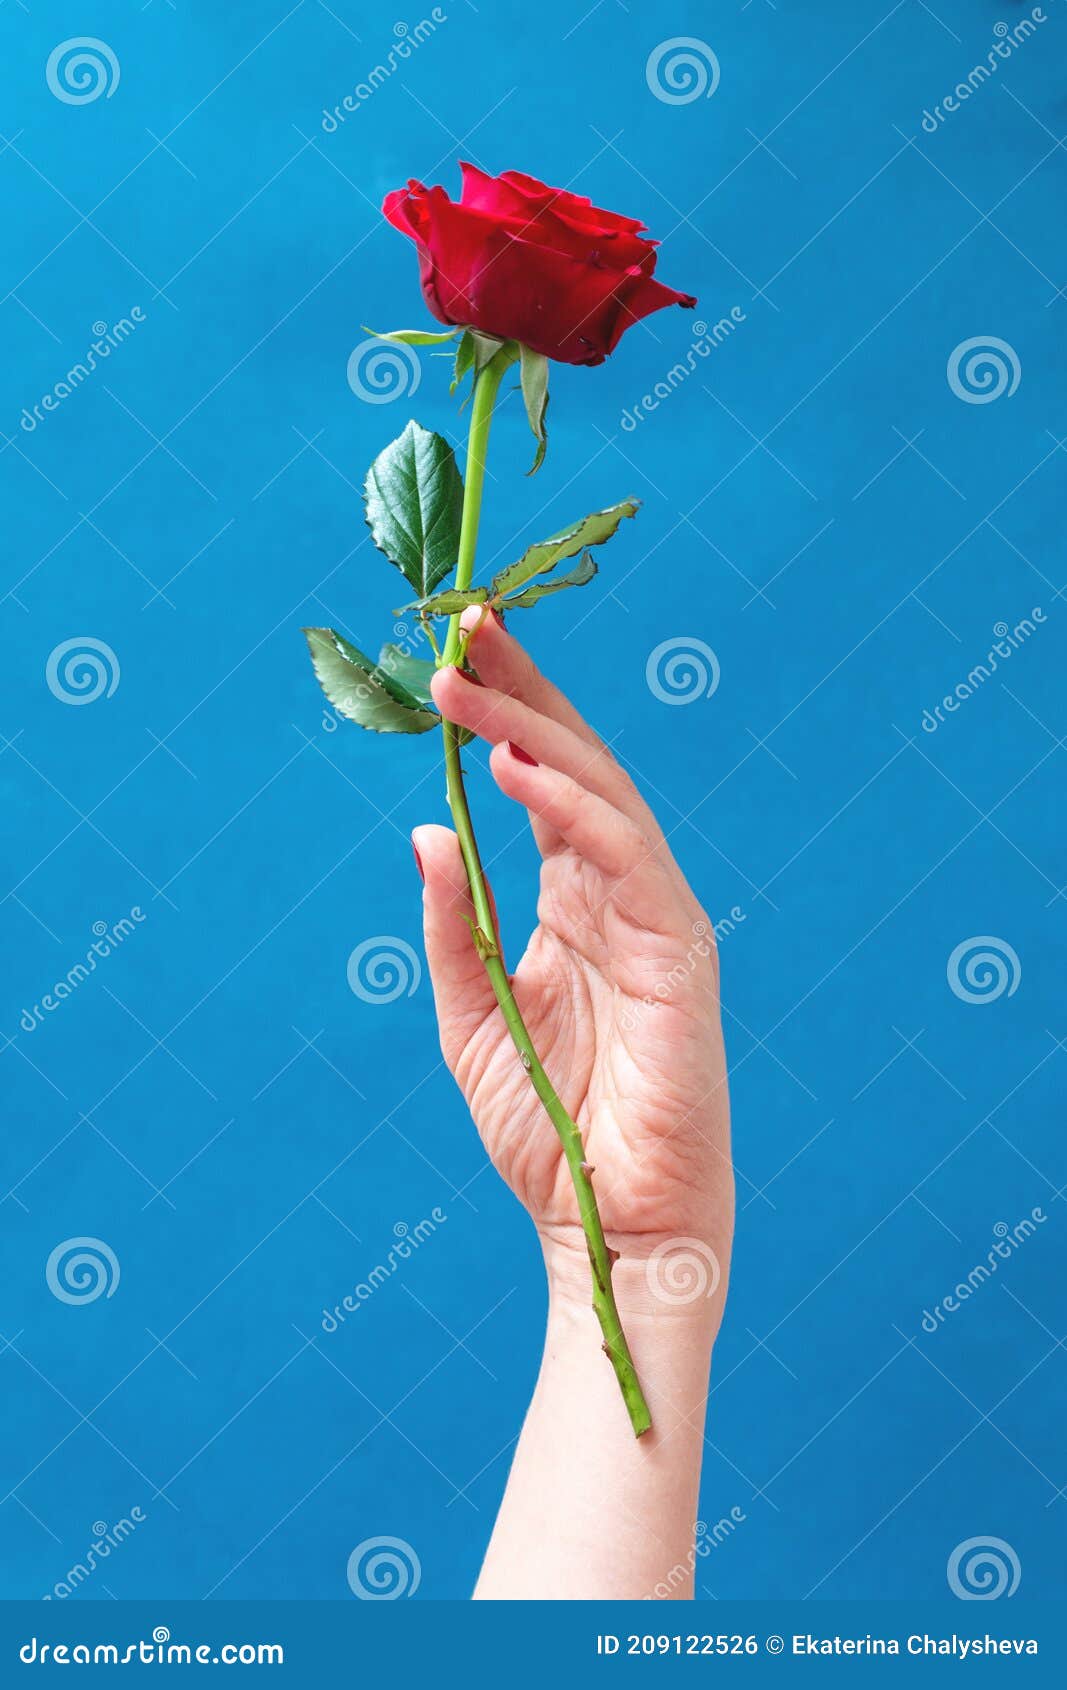 Woman Hand Holding a Beautiful Red Rose Stock Photo - Image of ...